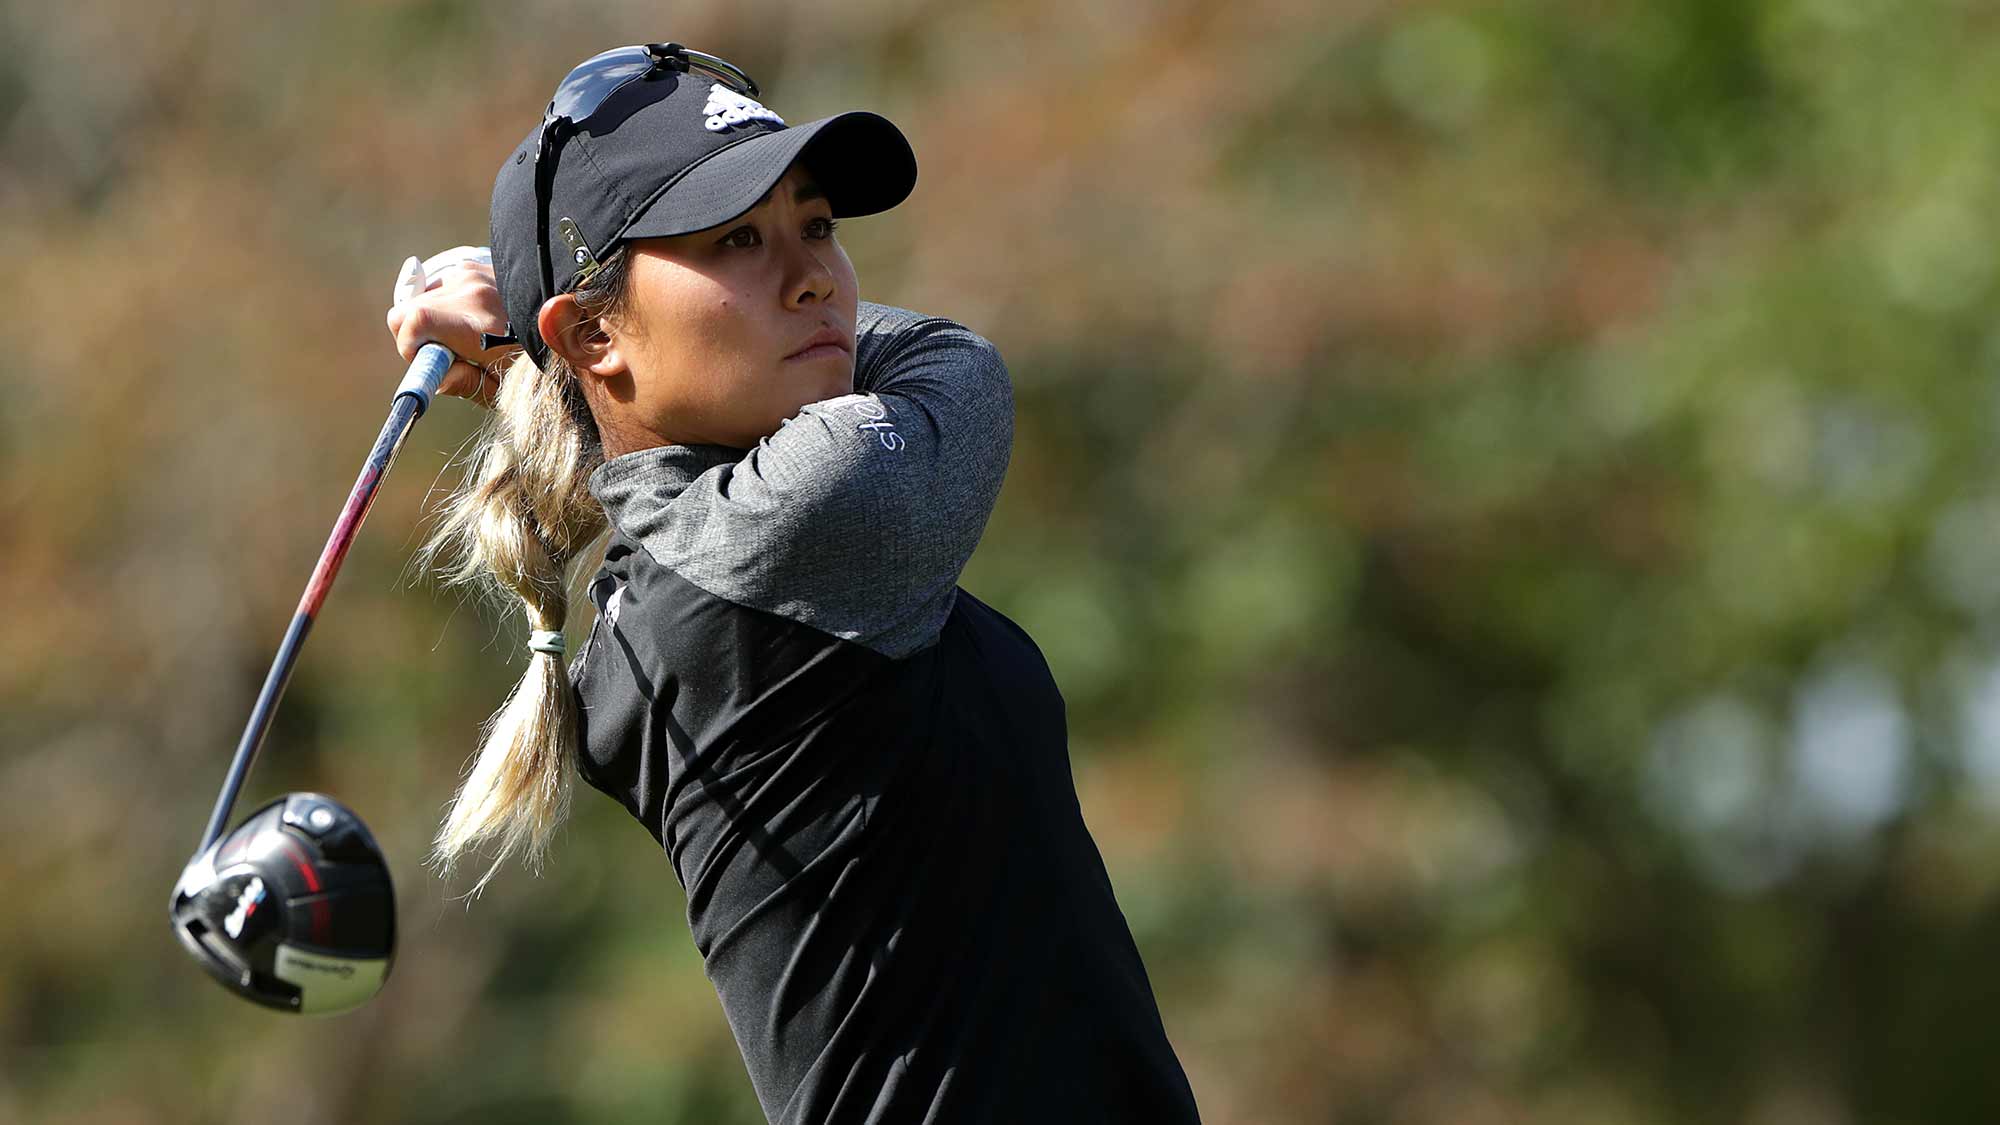 Danielle Kang of USA drives from a tee on the second hole during Round 2 of 2019 BMW Ladies Championship at LPGA International Busan on October 25, 2019 in Busan, Republic of Korea